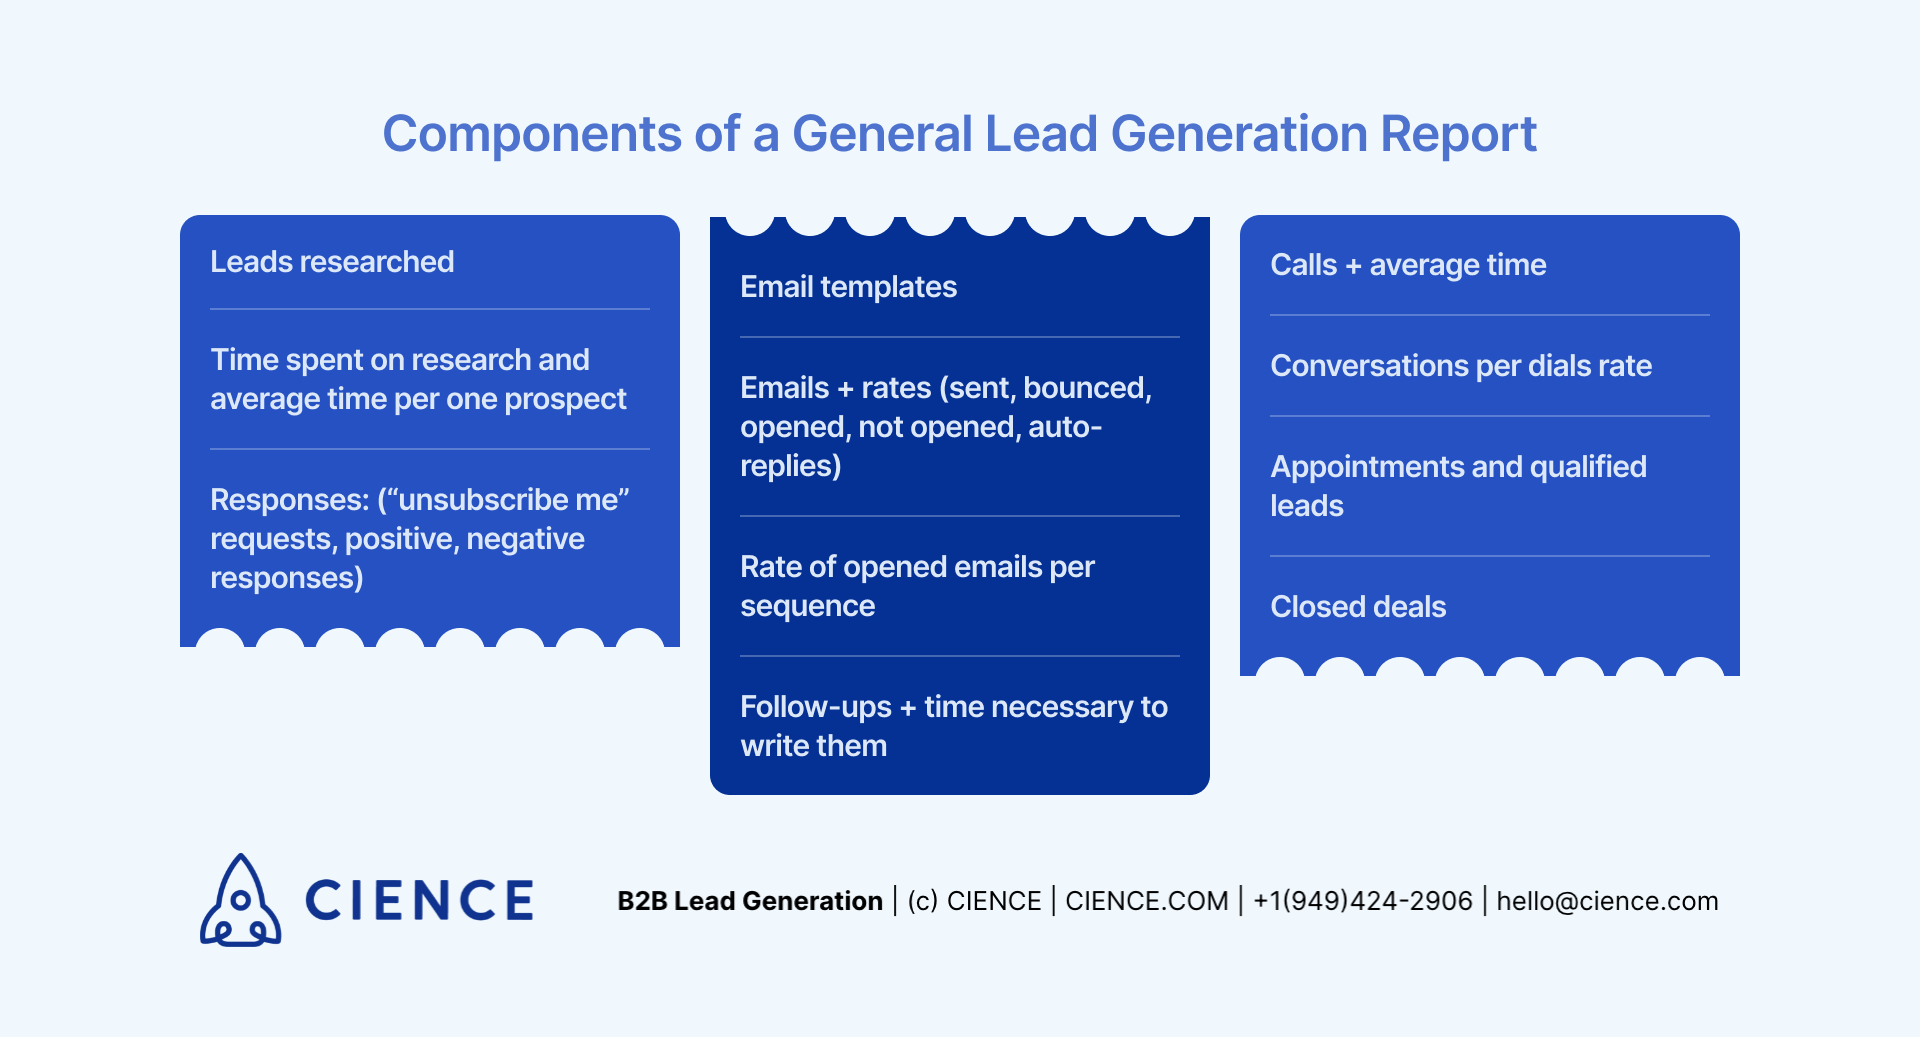 Components of a Lead Generation Report